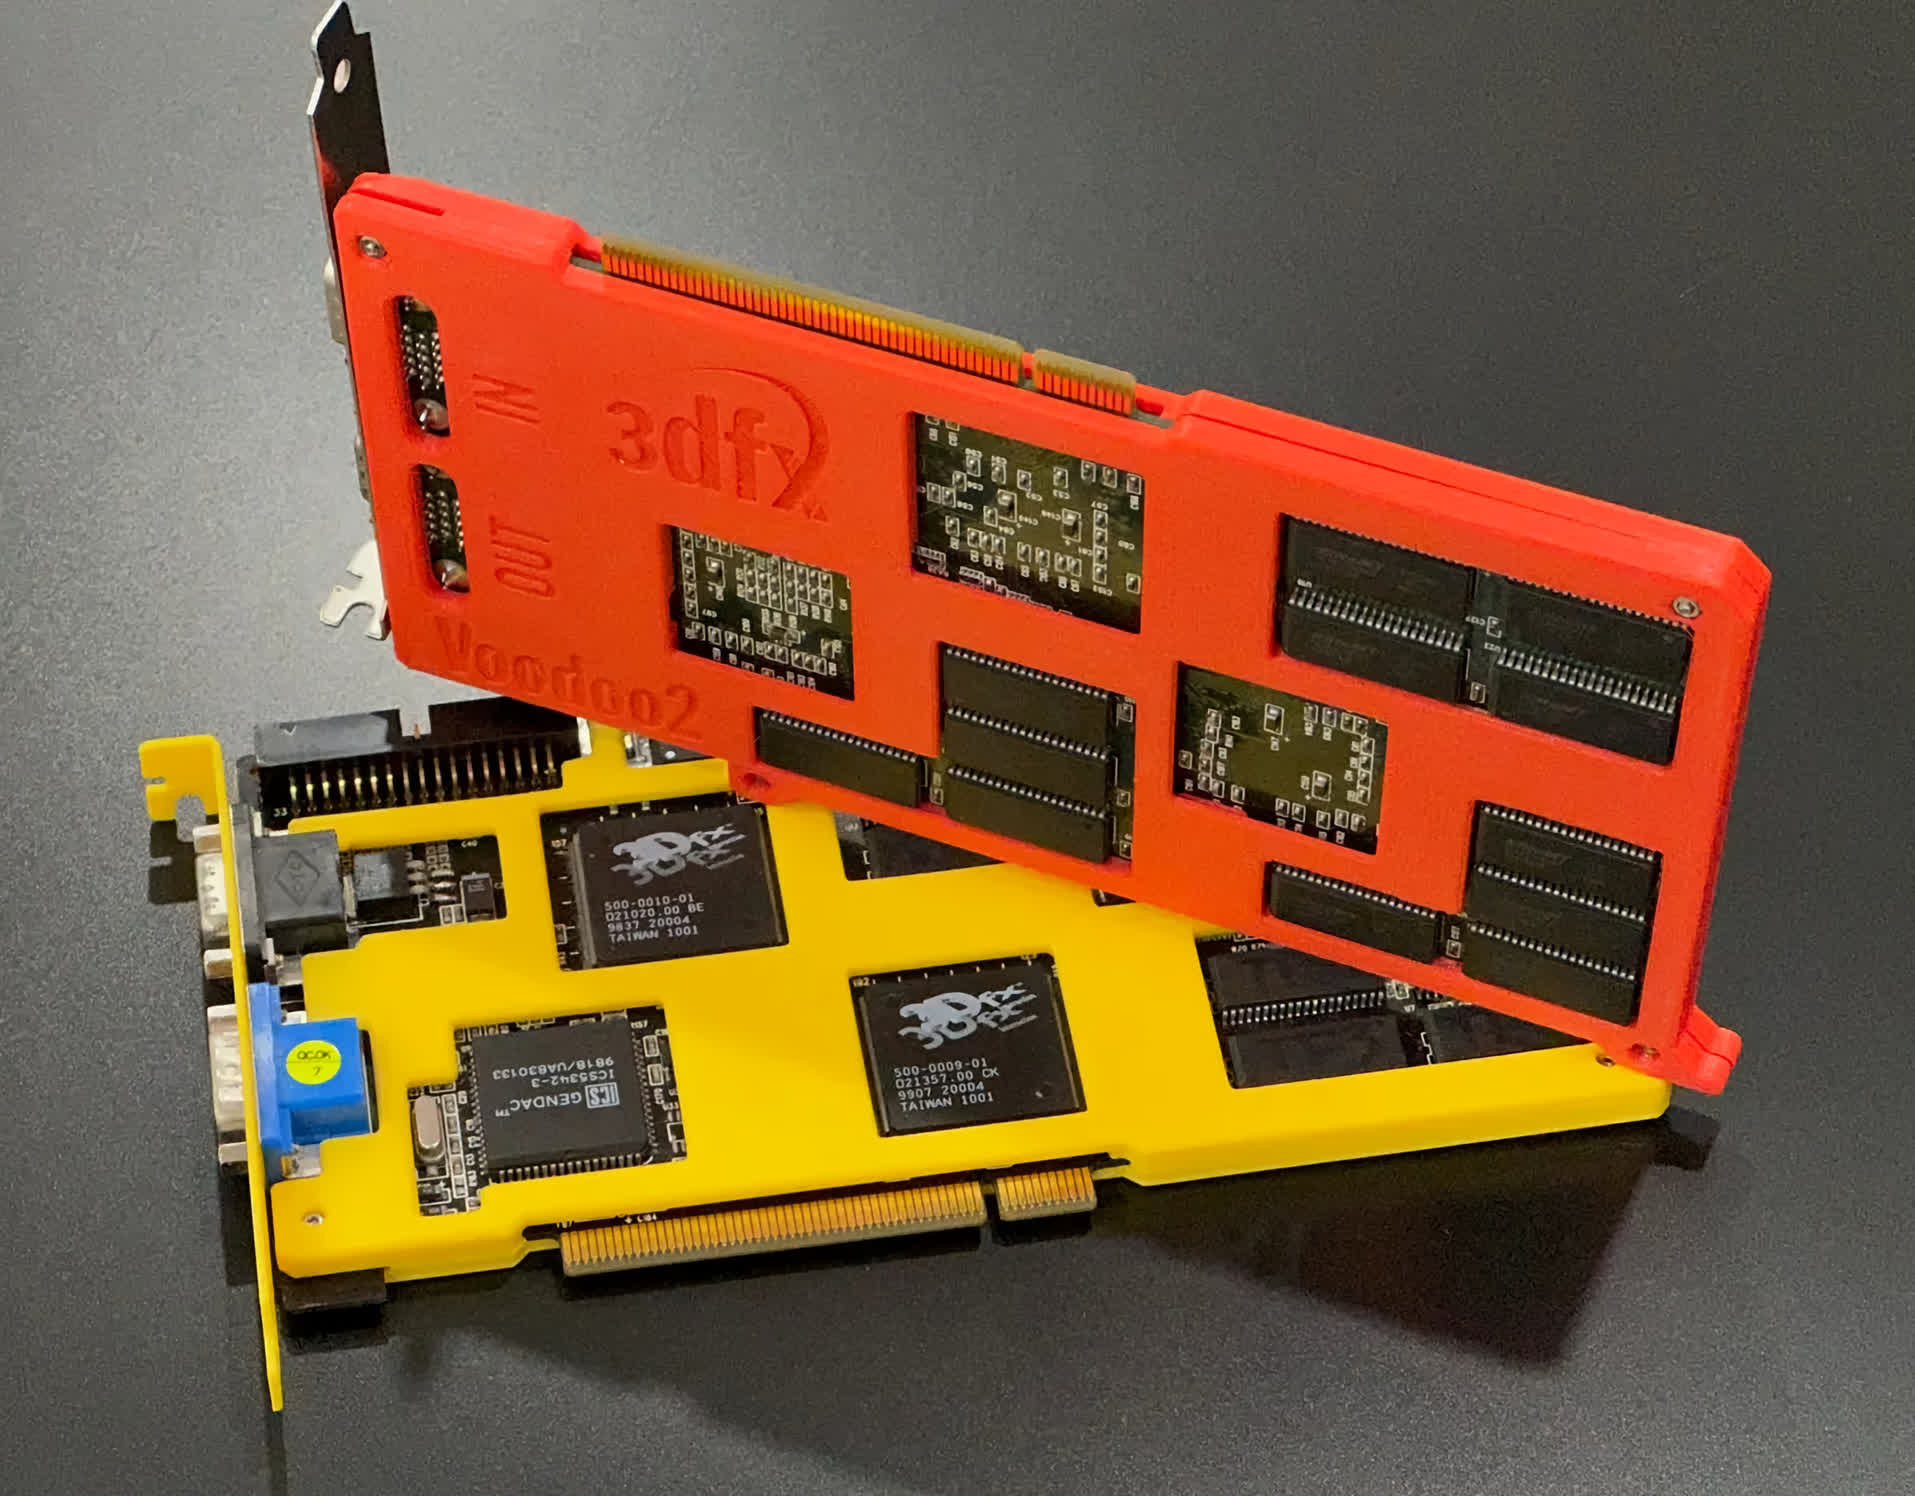 3D printed armor kit can protect your vintage 3Dfx Voodoo2 card against physical damage